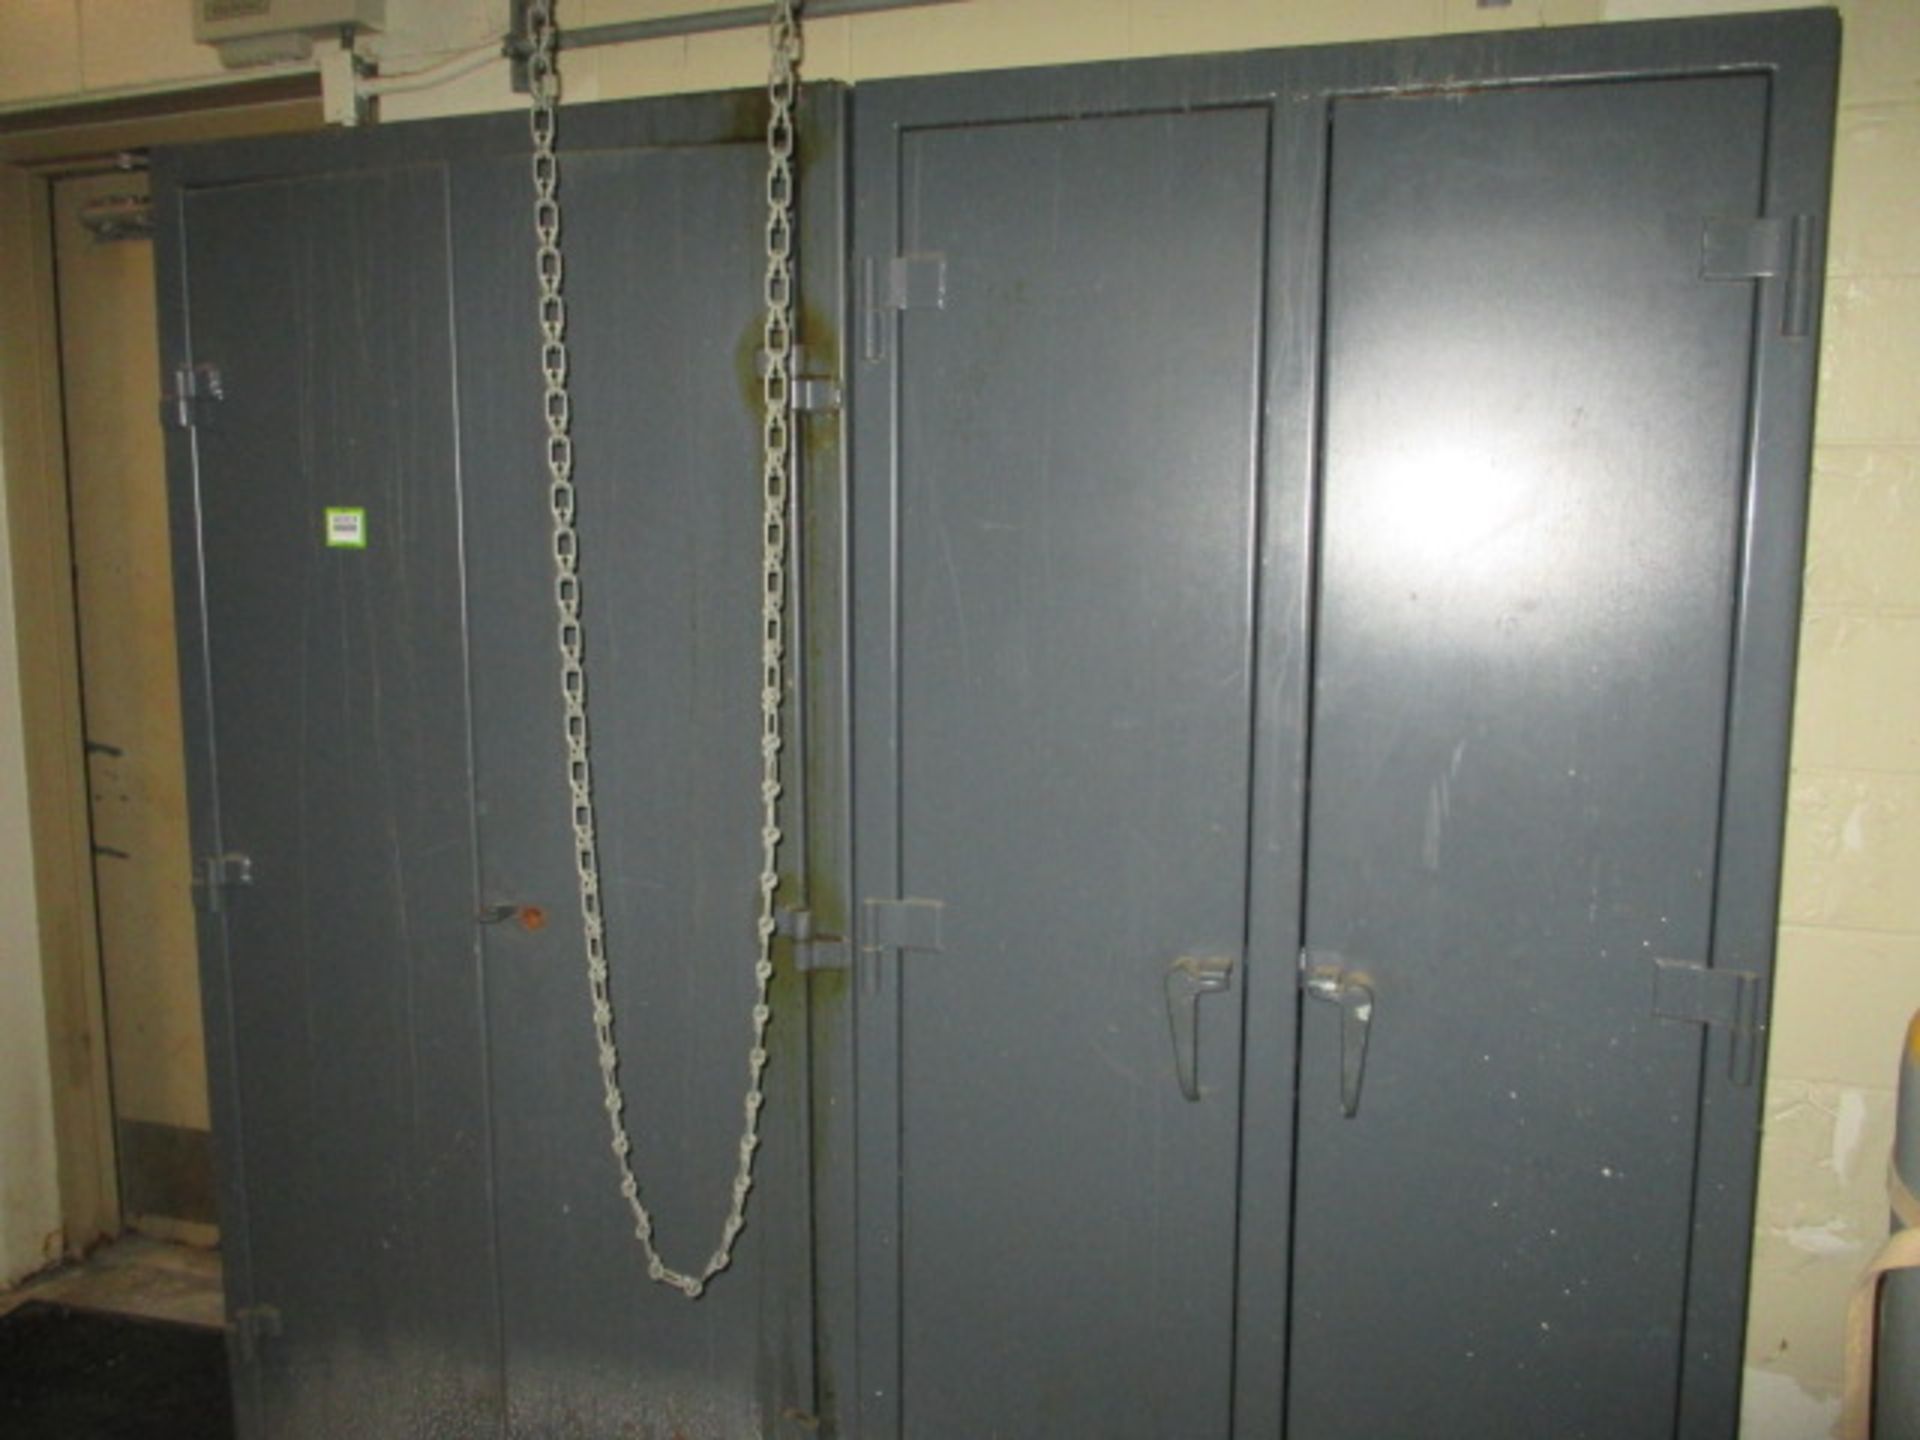 Stronghold Storage Cabinets; Lot: (2) Heavy Duty Storage Cabinets, 36"x 24"x 78". HIT# 2223316. Loc: